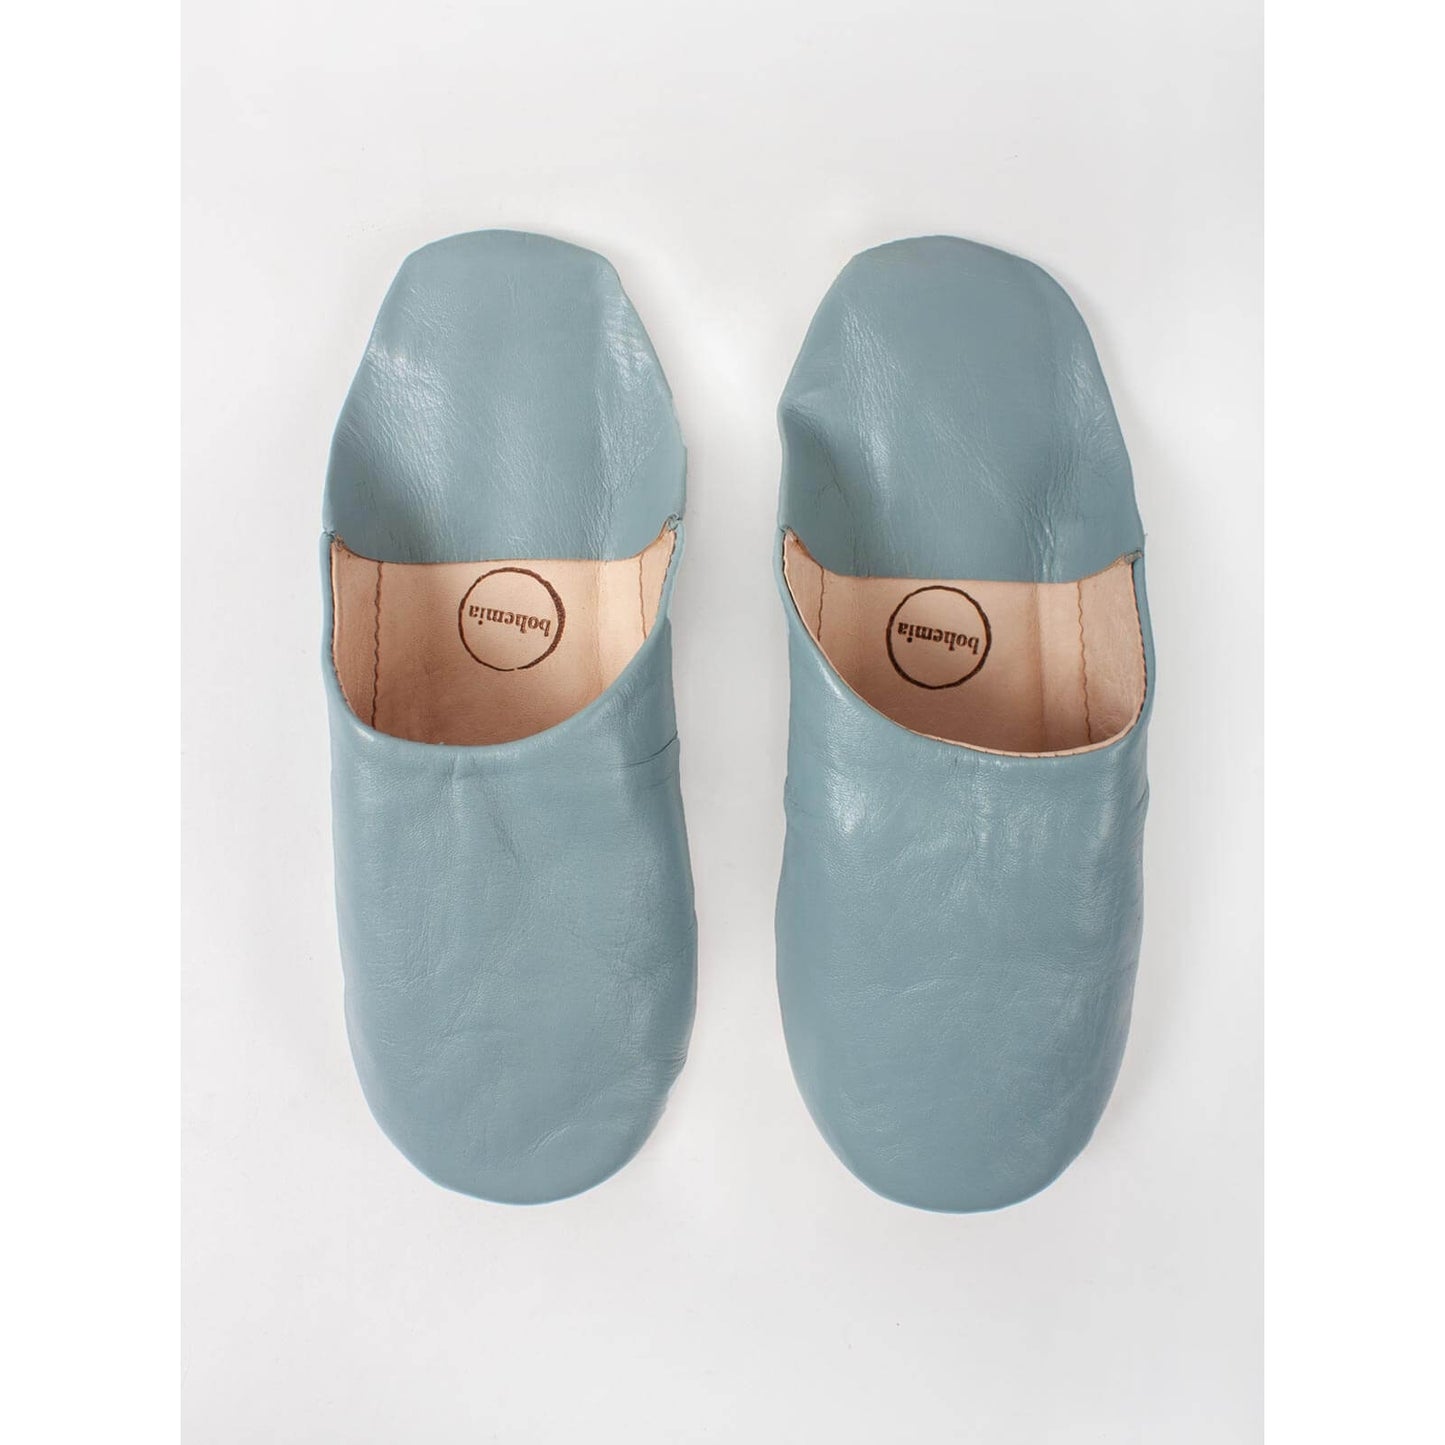 Moroccan Babouche Slippers, Blue